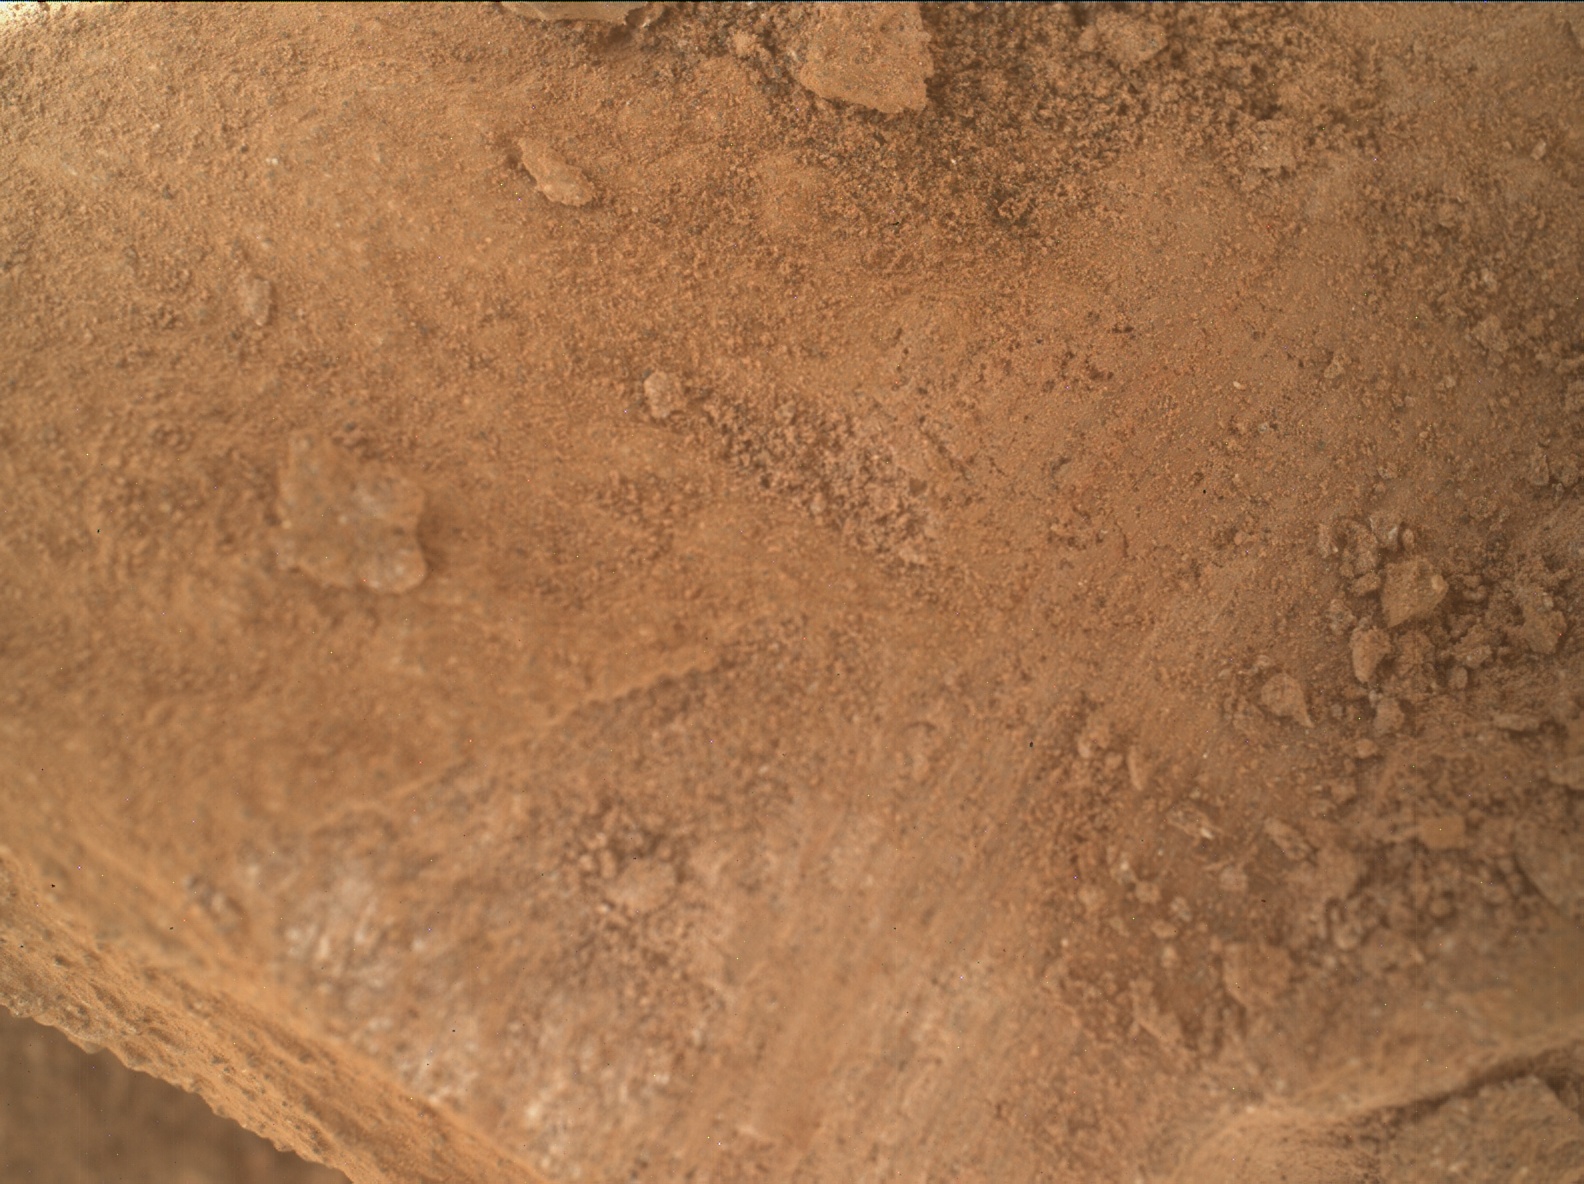 Nasa's Mars rover Curiosity acquired this image using its Mars Hand Lens Imager (MAHLI) on Sol 3458